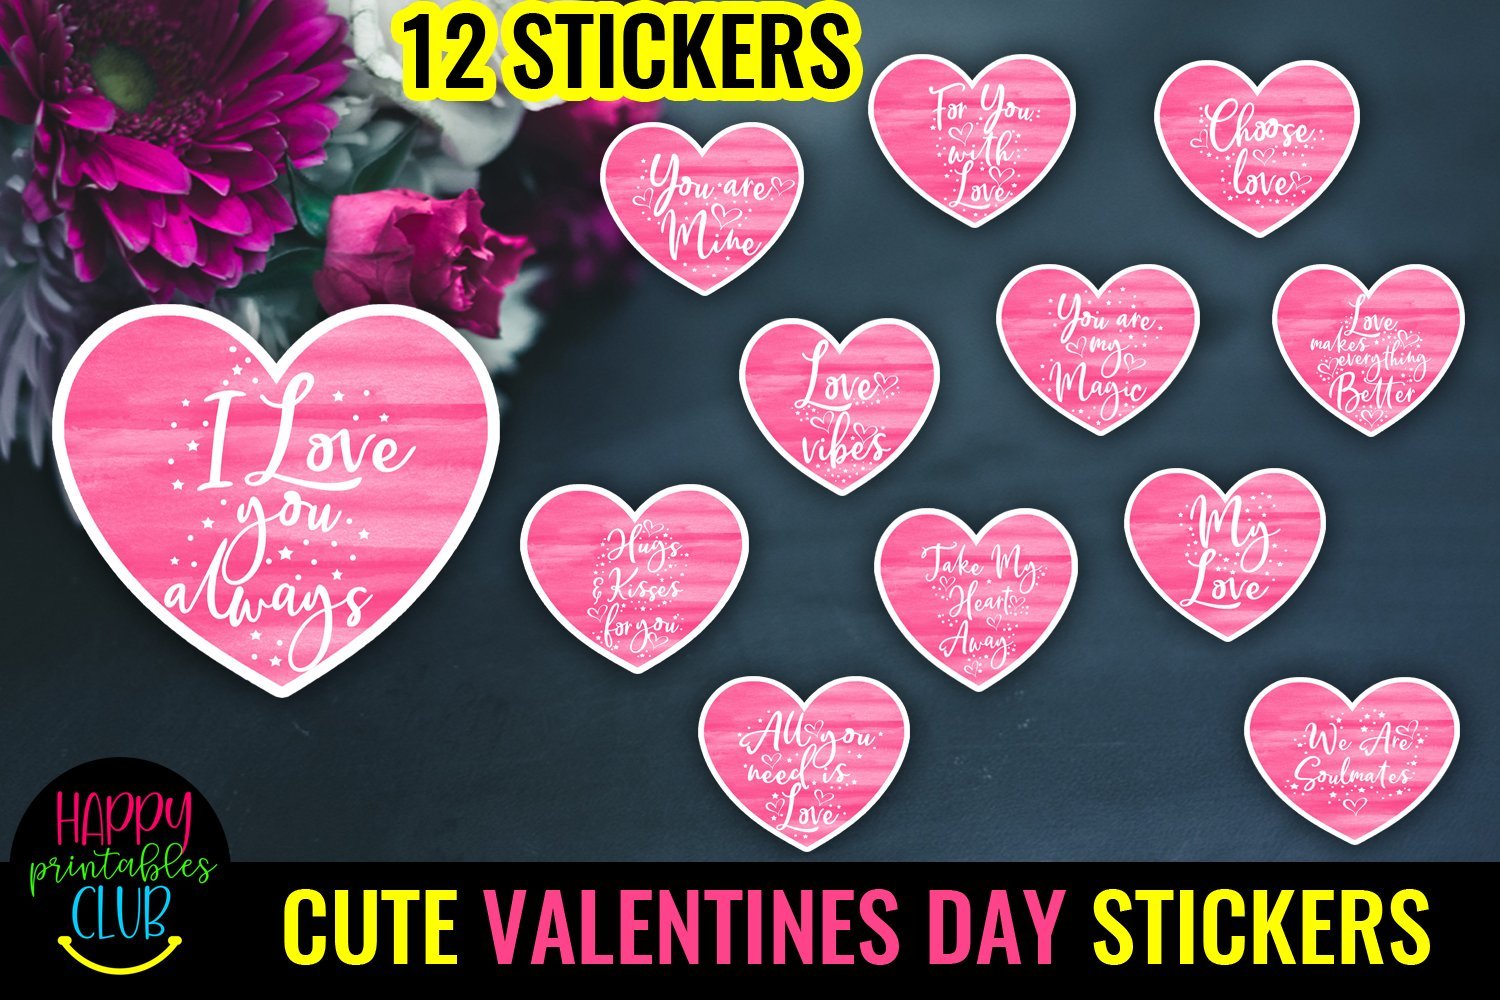 Heart Stickers for Valentine's Day